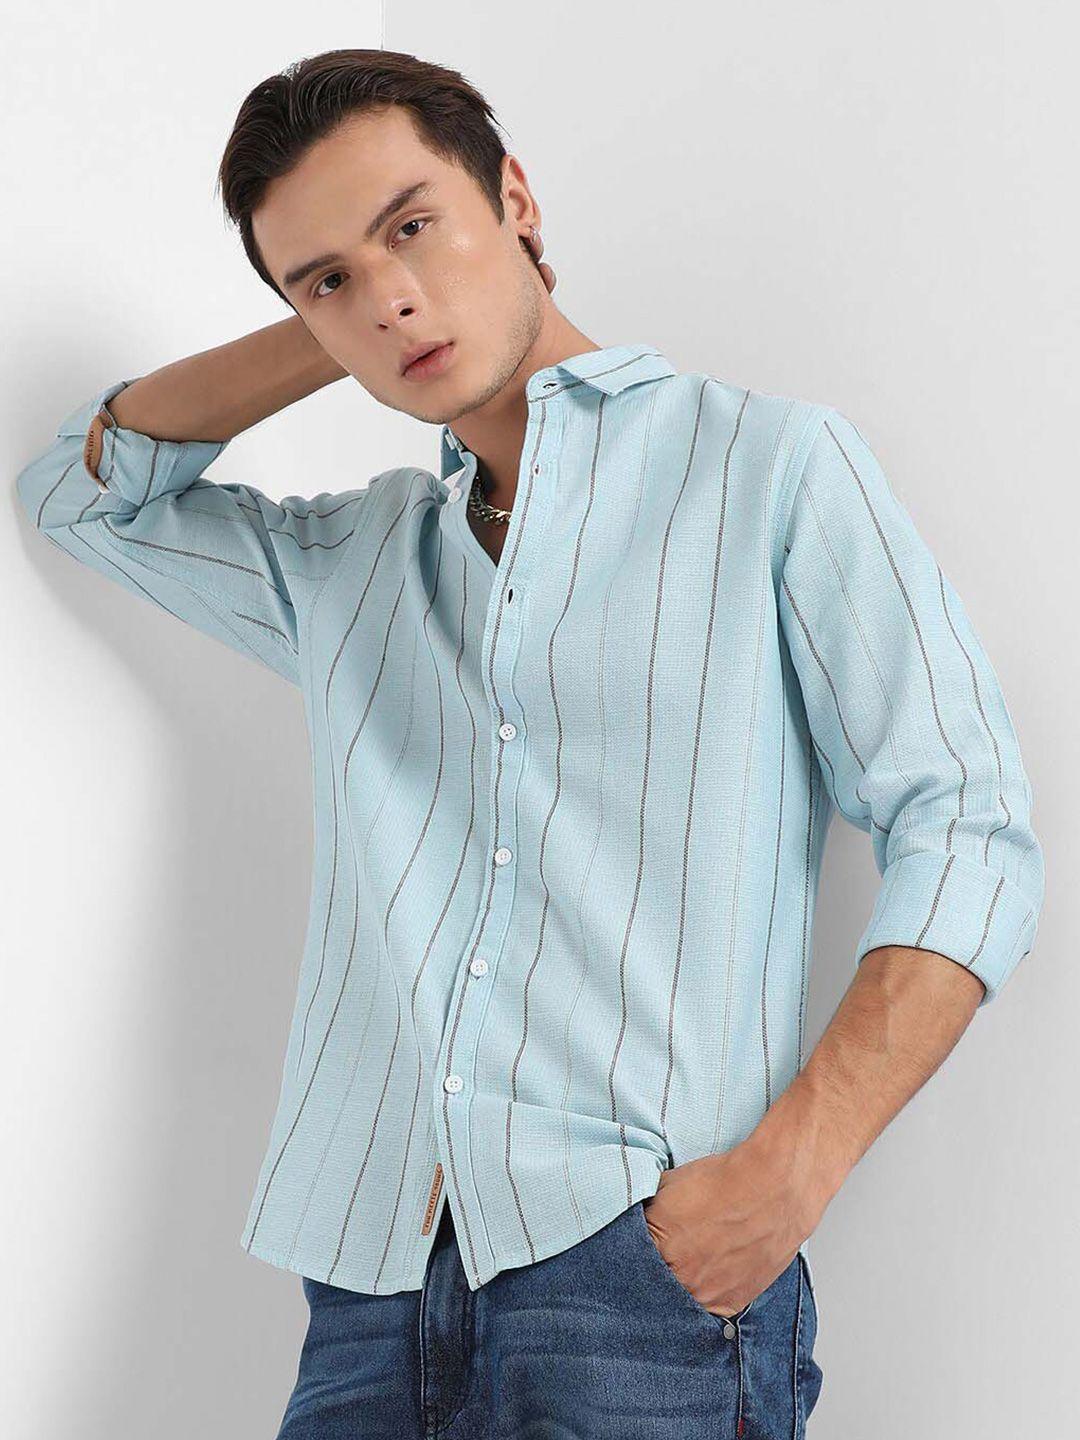 campus sutra classic striped spread collar regular fit cotton casual shirt